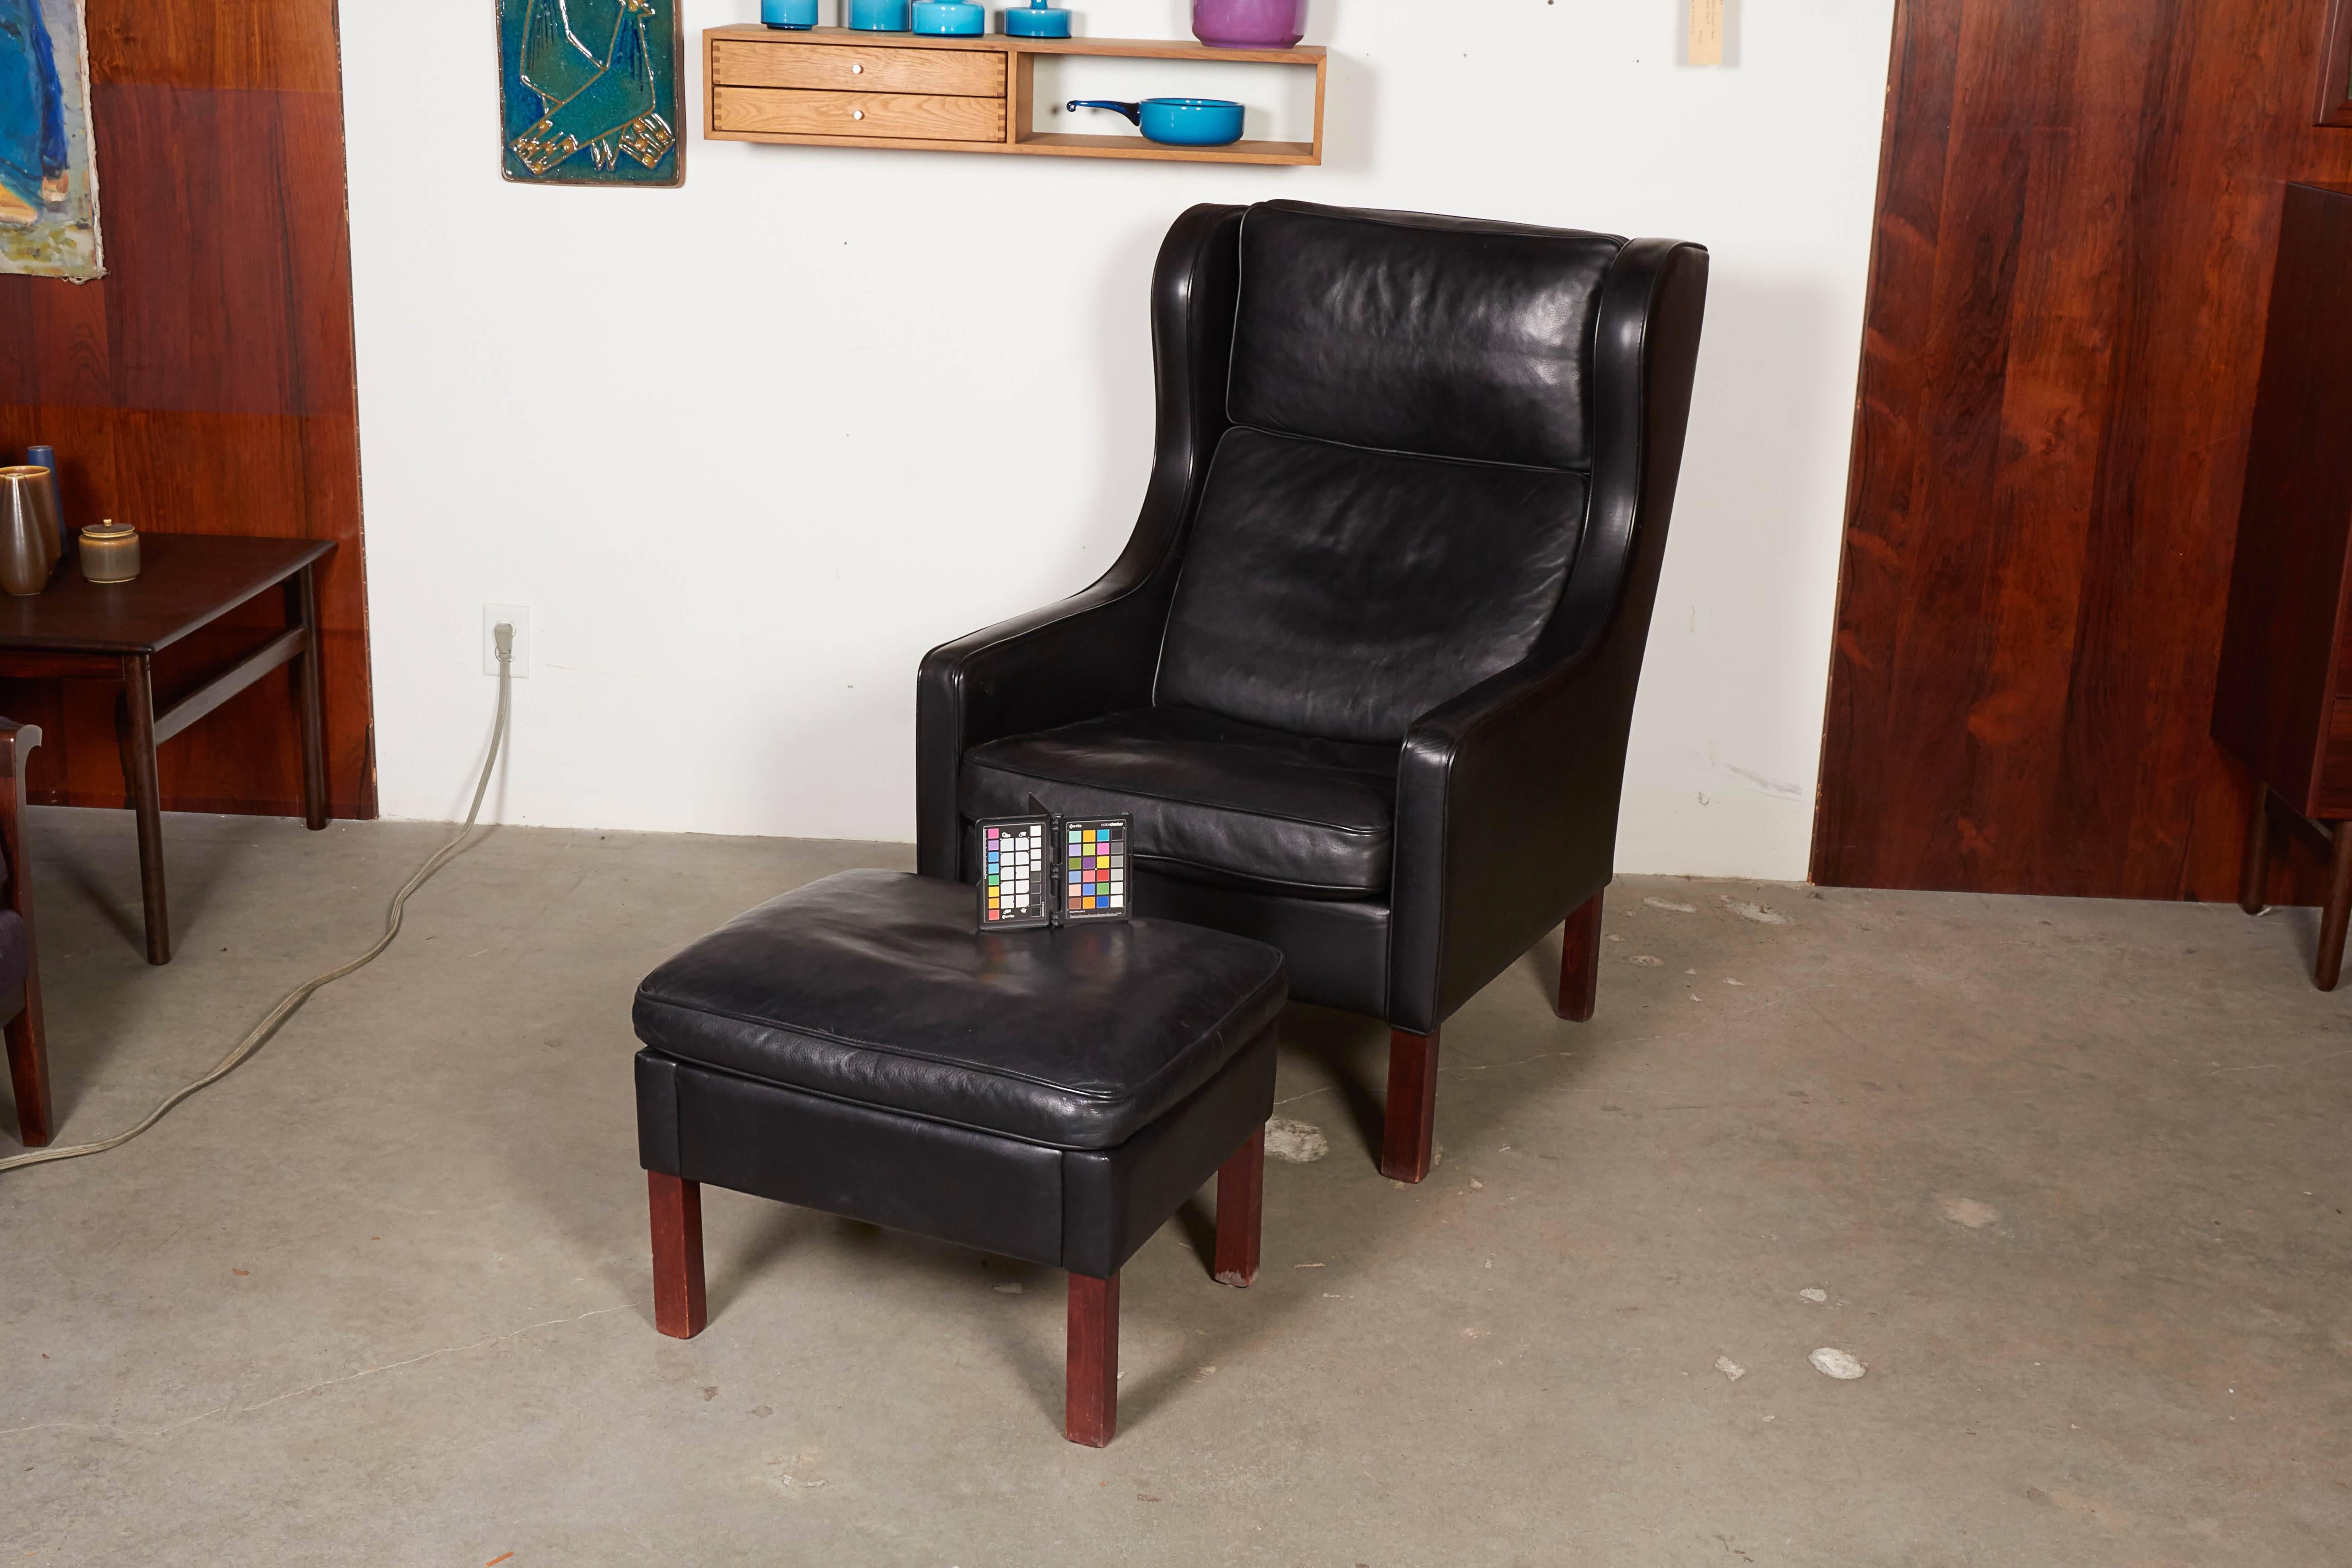 Vintage 1960s Borge Mogensen Styled Wingback Chairs

These Danish arm chairs are absolutely beautiful. The leather is intact yet wonderfully broken in. Comfortable in everyday. Ready for pick up, delivery, or shipping anywhere in the world.